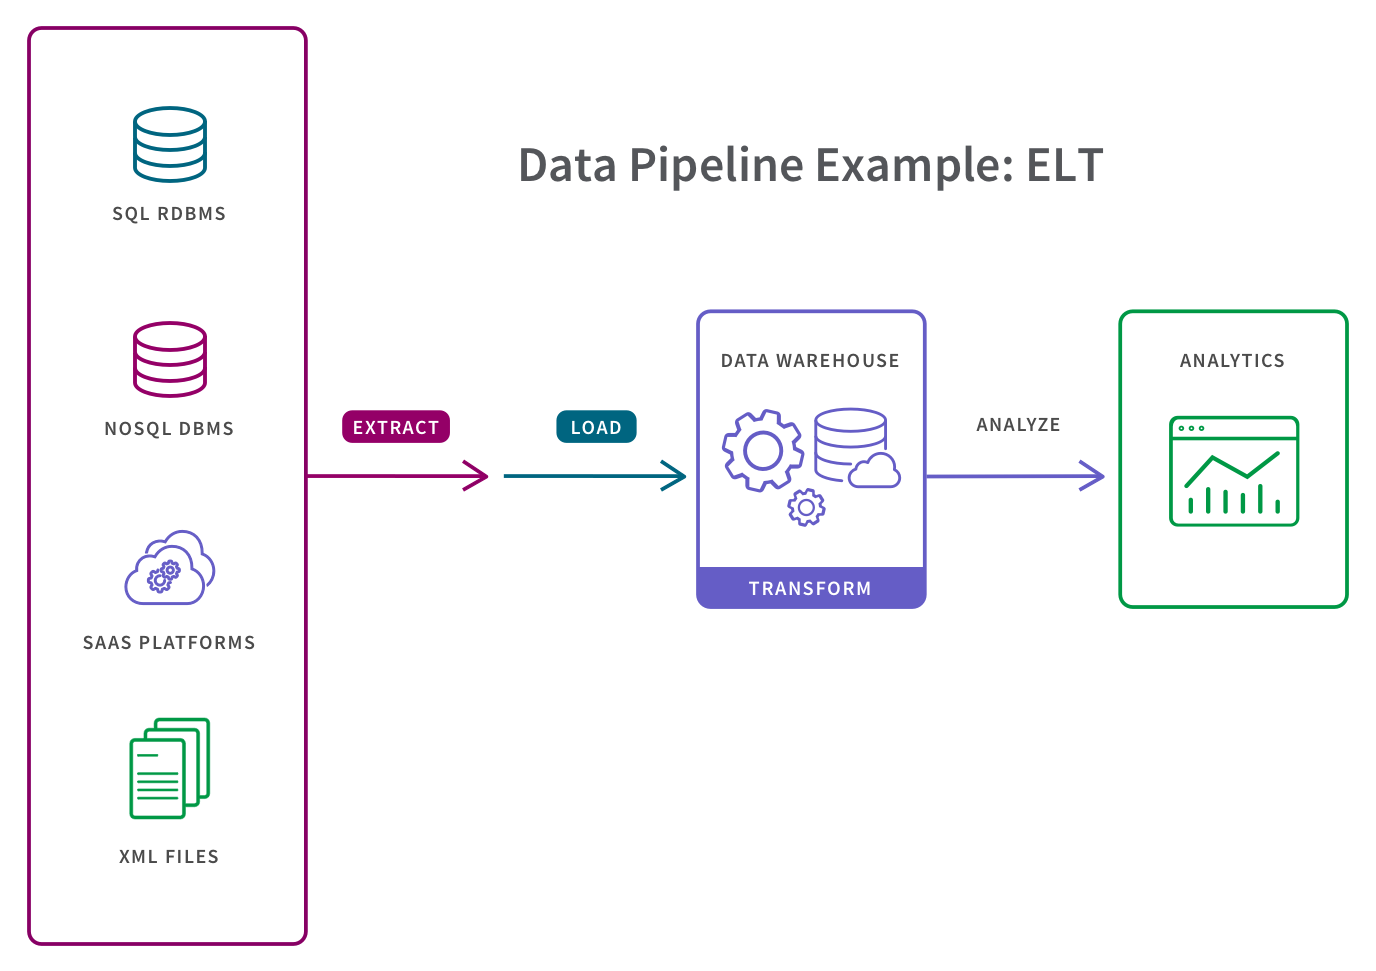 What is the difference between ETL and ETL pipeline?